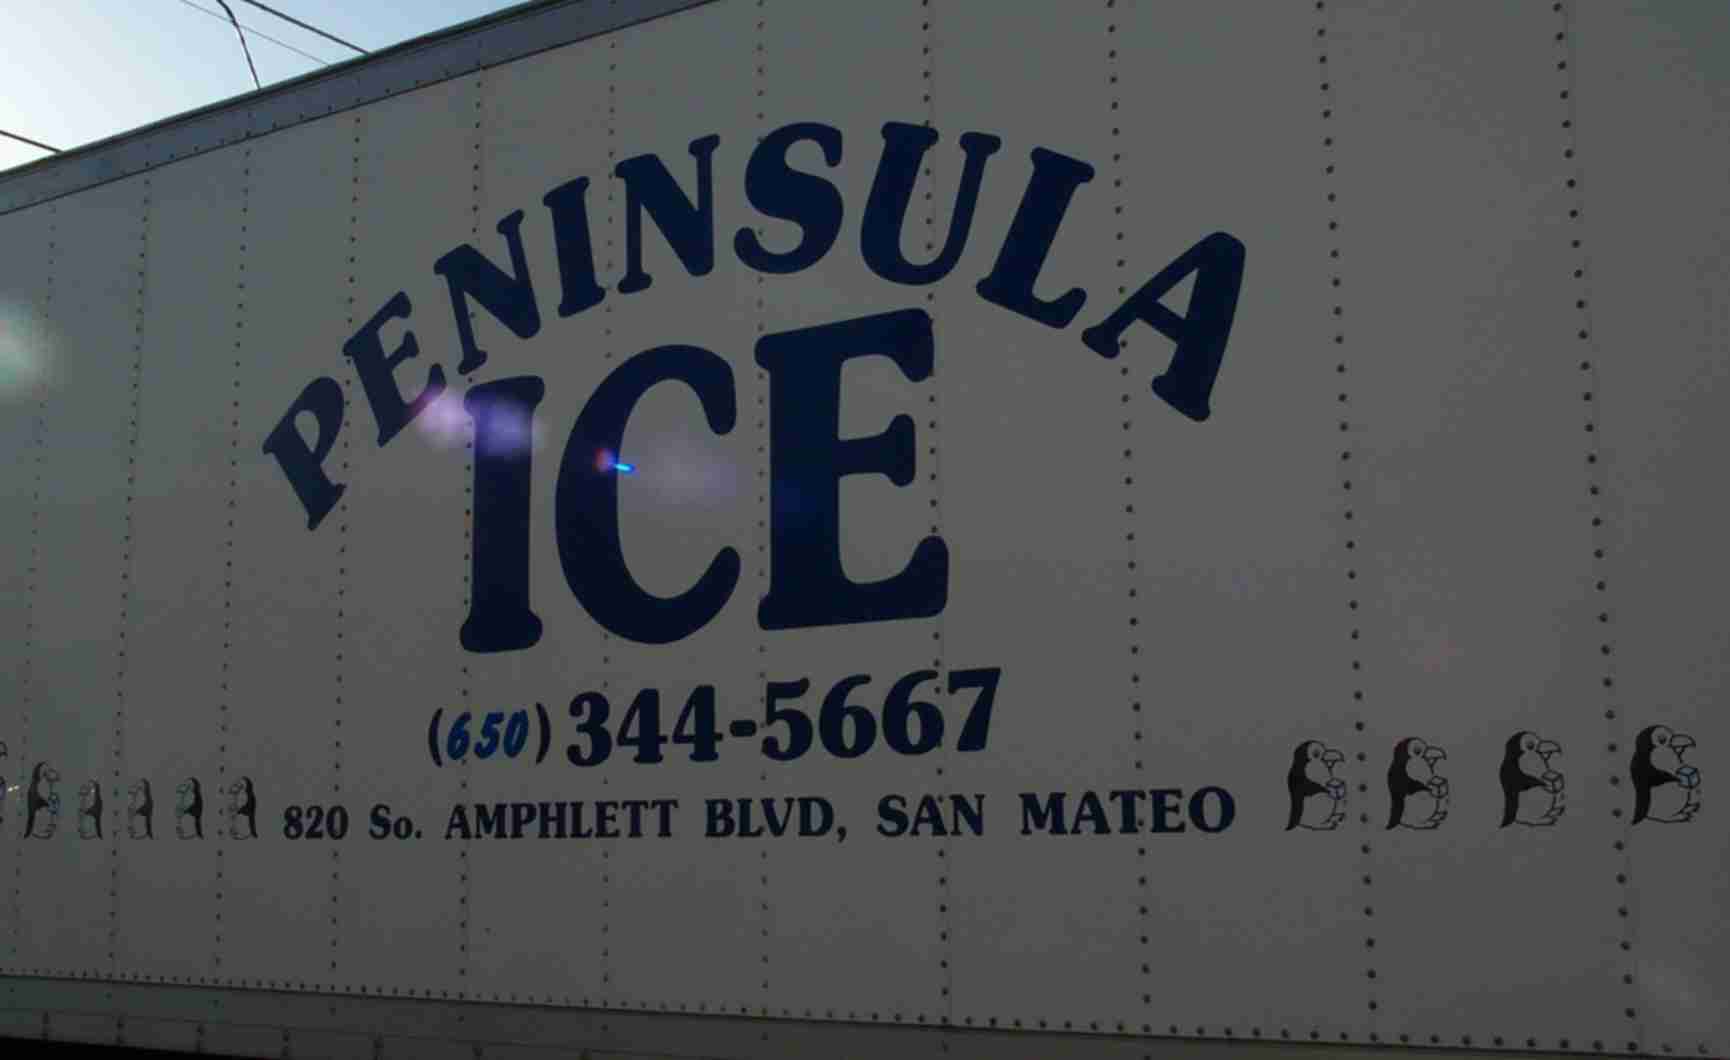 Peninsula Ice Delivery Truck